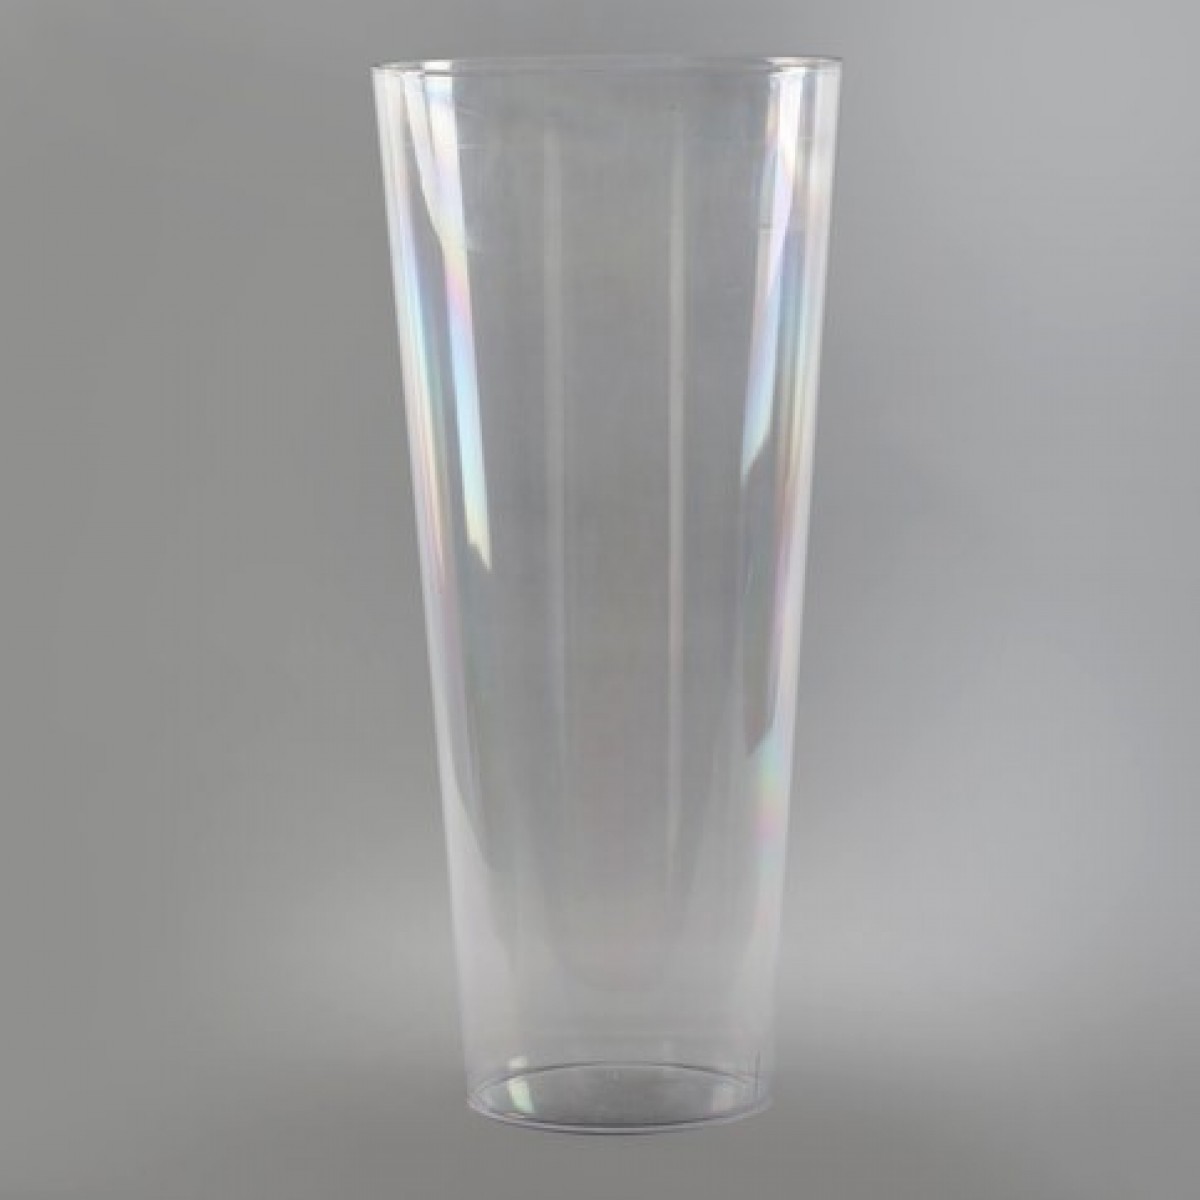 5131 Conical Clear 25x55cm Acrylic Vase - 1 No